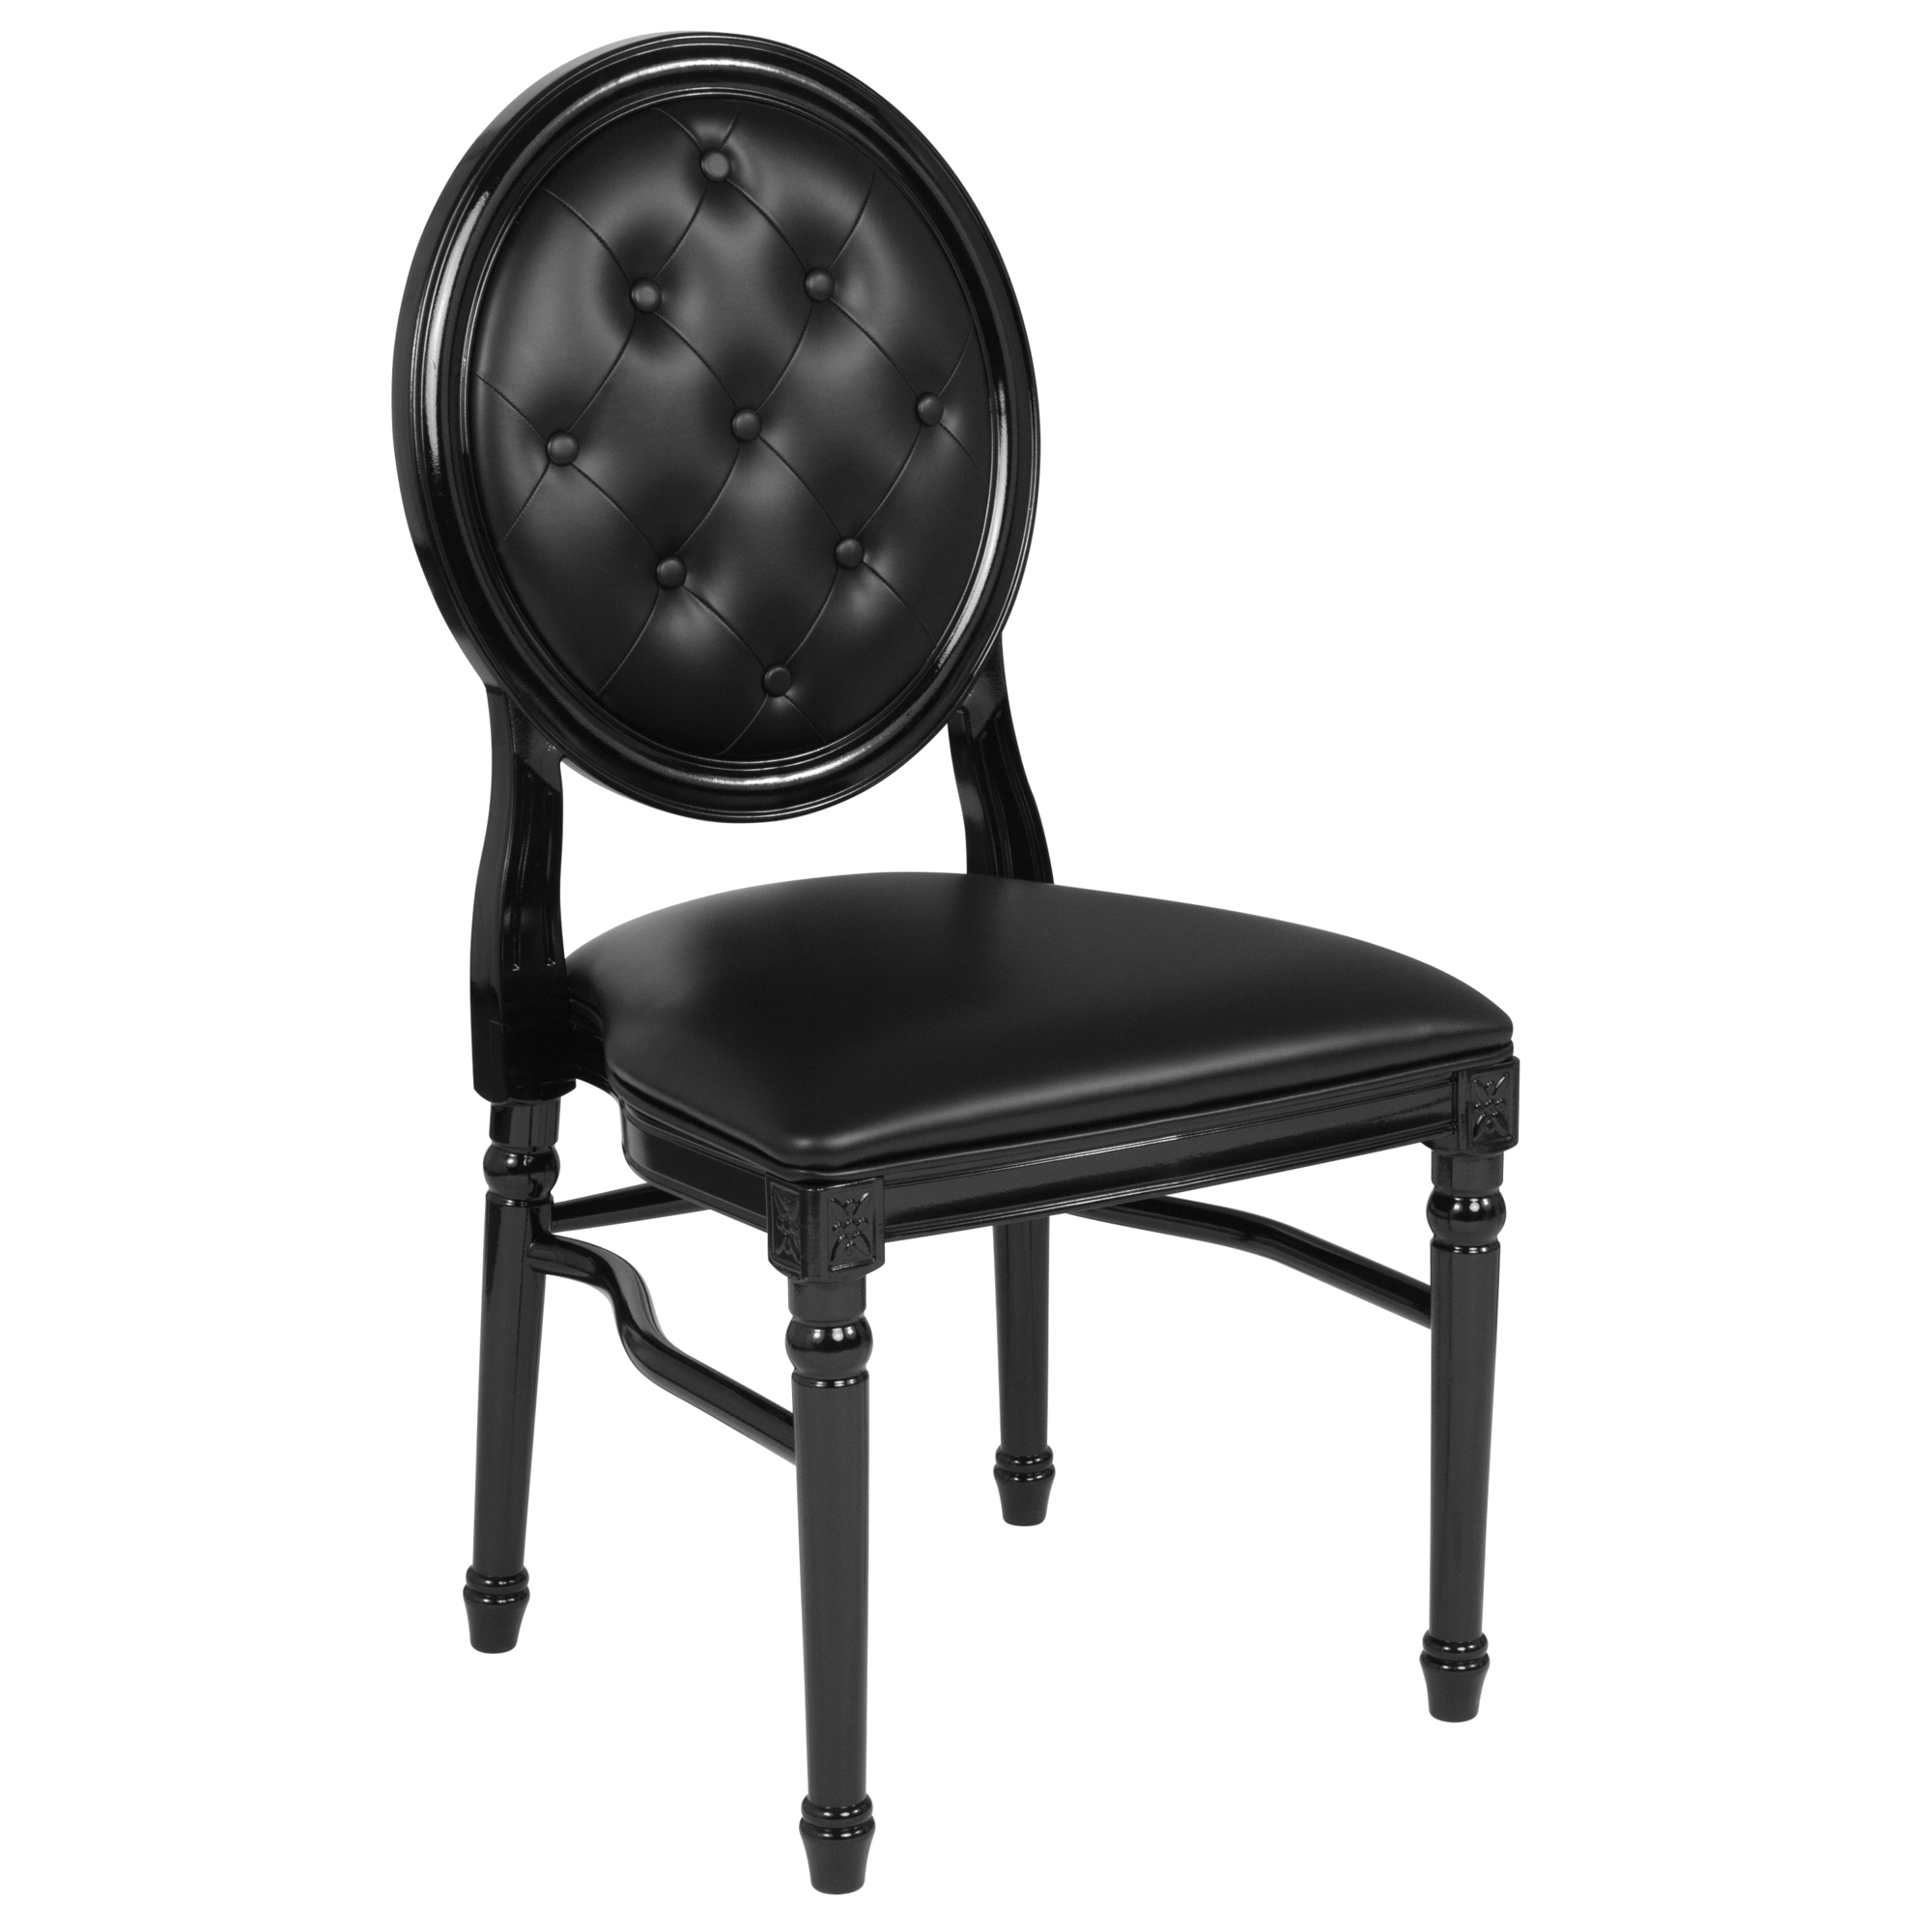 Flash Furniture, 900 lb. Capacity Tufted Back Chair with Vinyl Seat, Primary Color Black, Included (qty.) 1, Model LEBBTMON